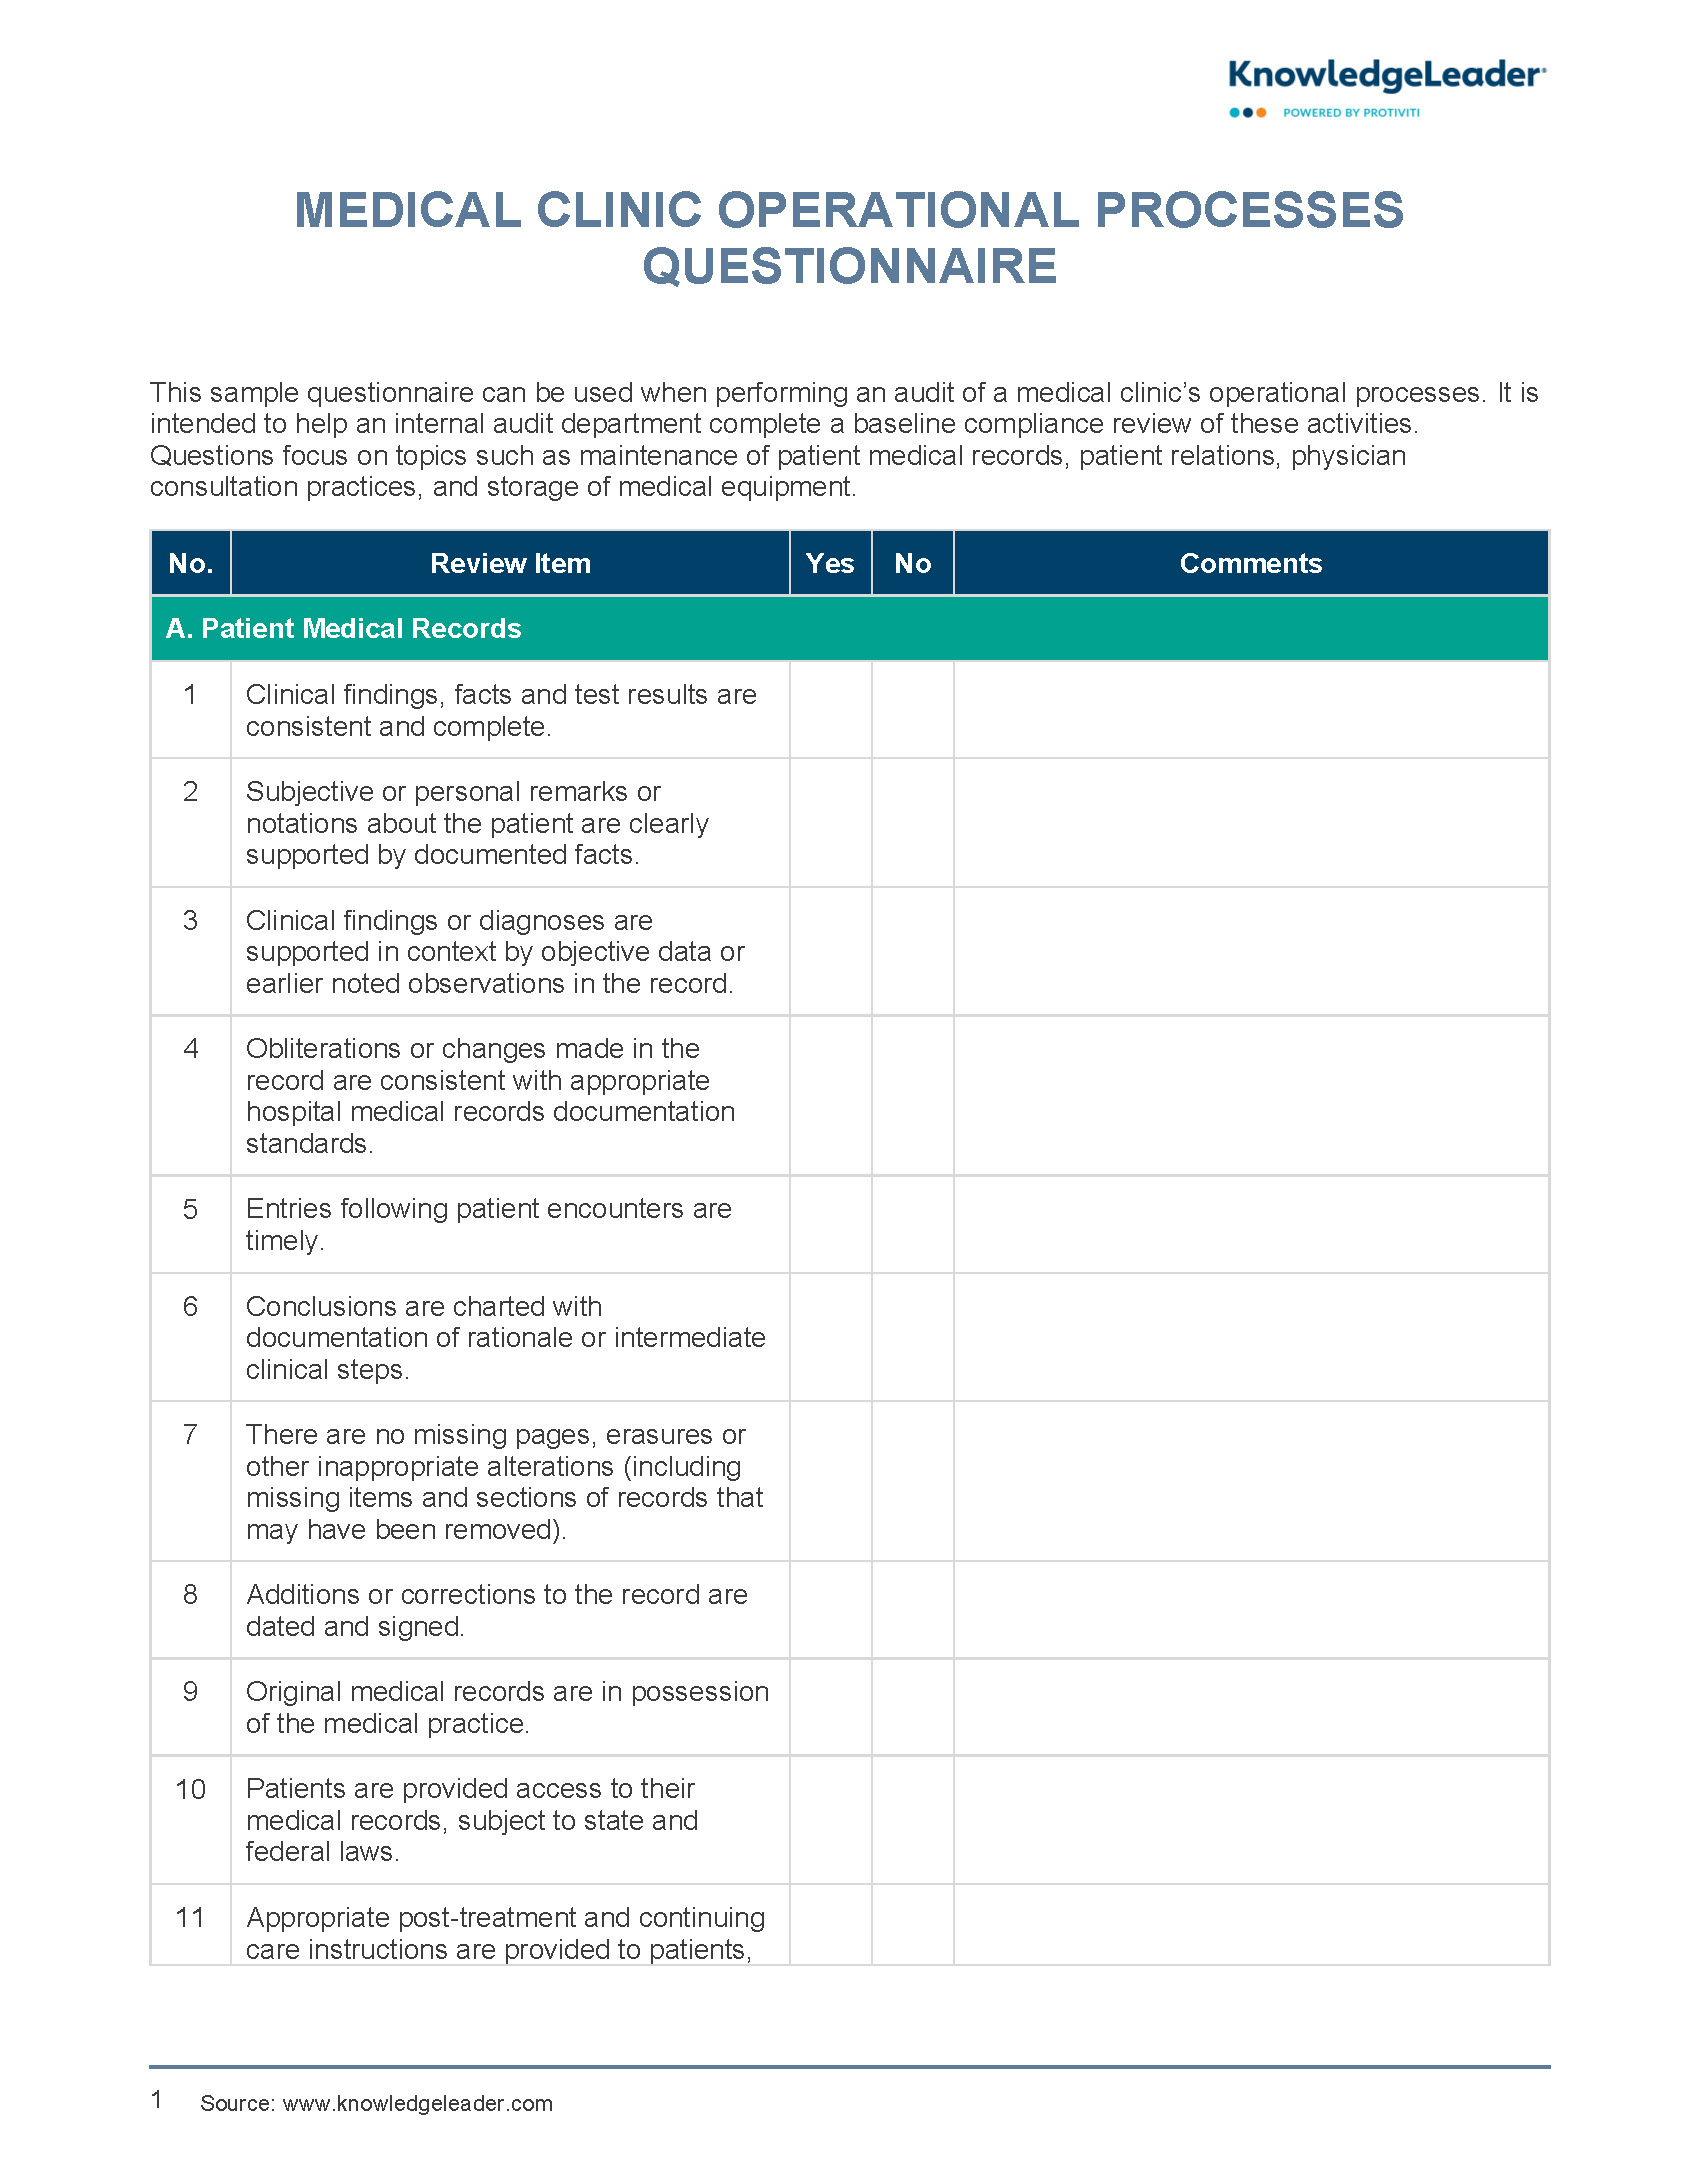 Screenshot of the first page of Medical Clinic Operational Processes Questionnaire